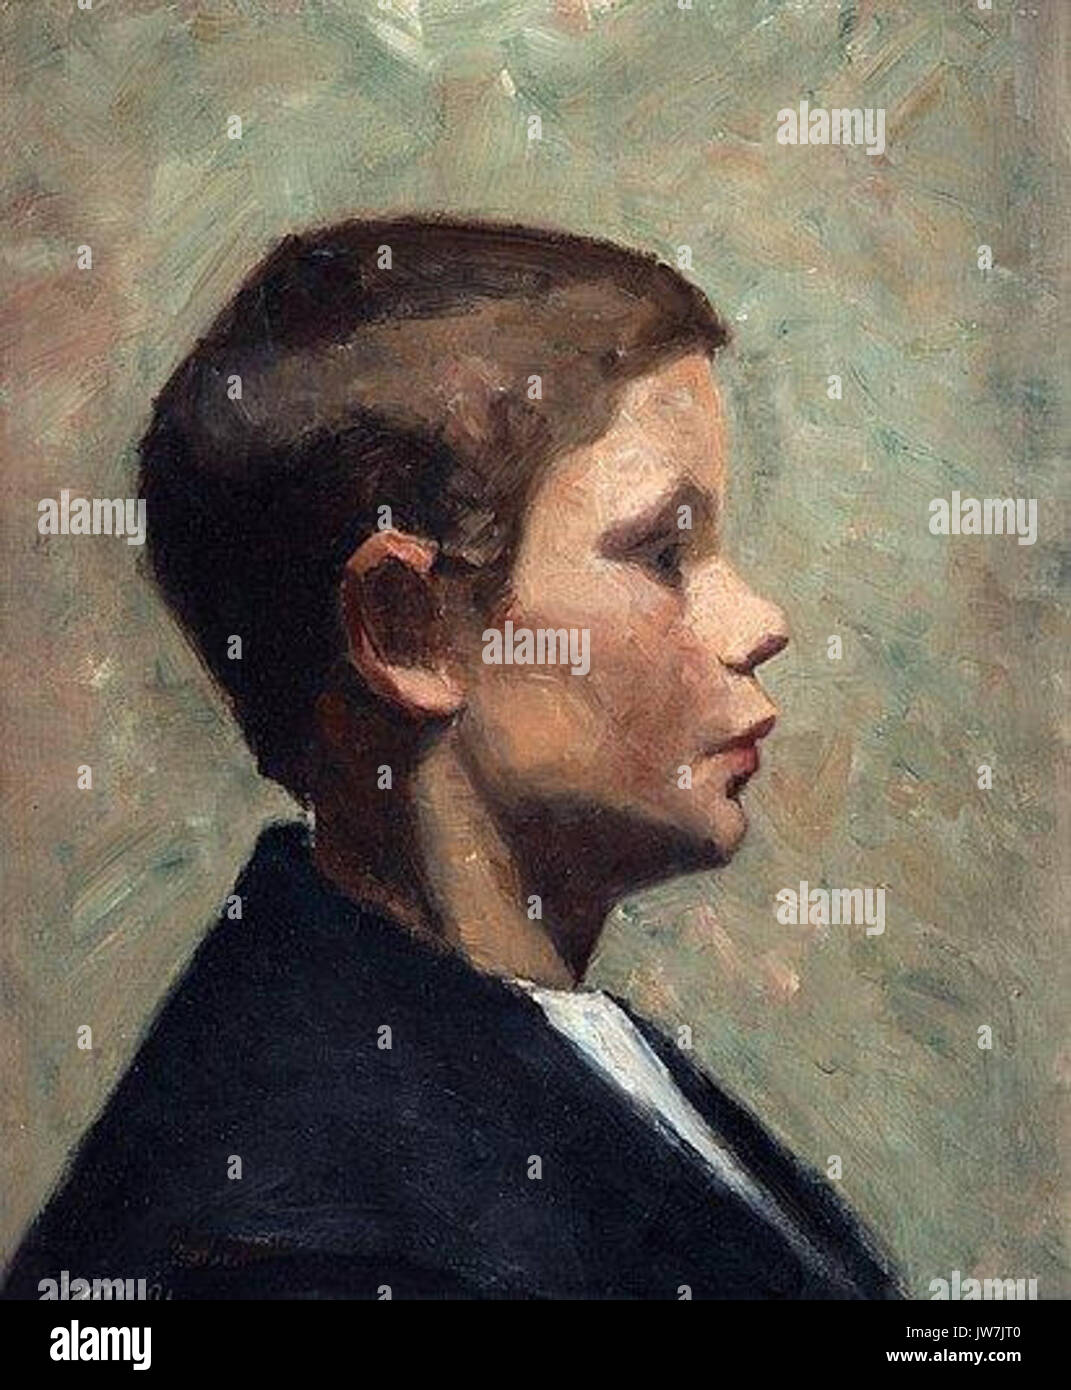 Marie Kroyer Young boy in profile Stock Photo